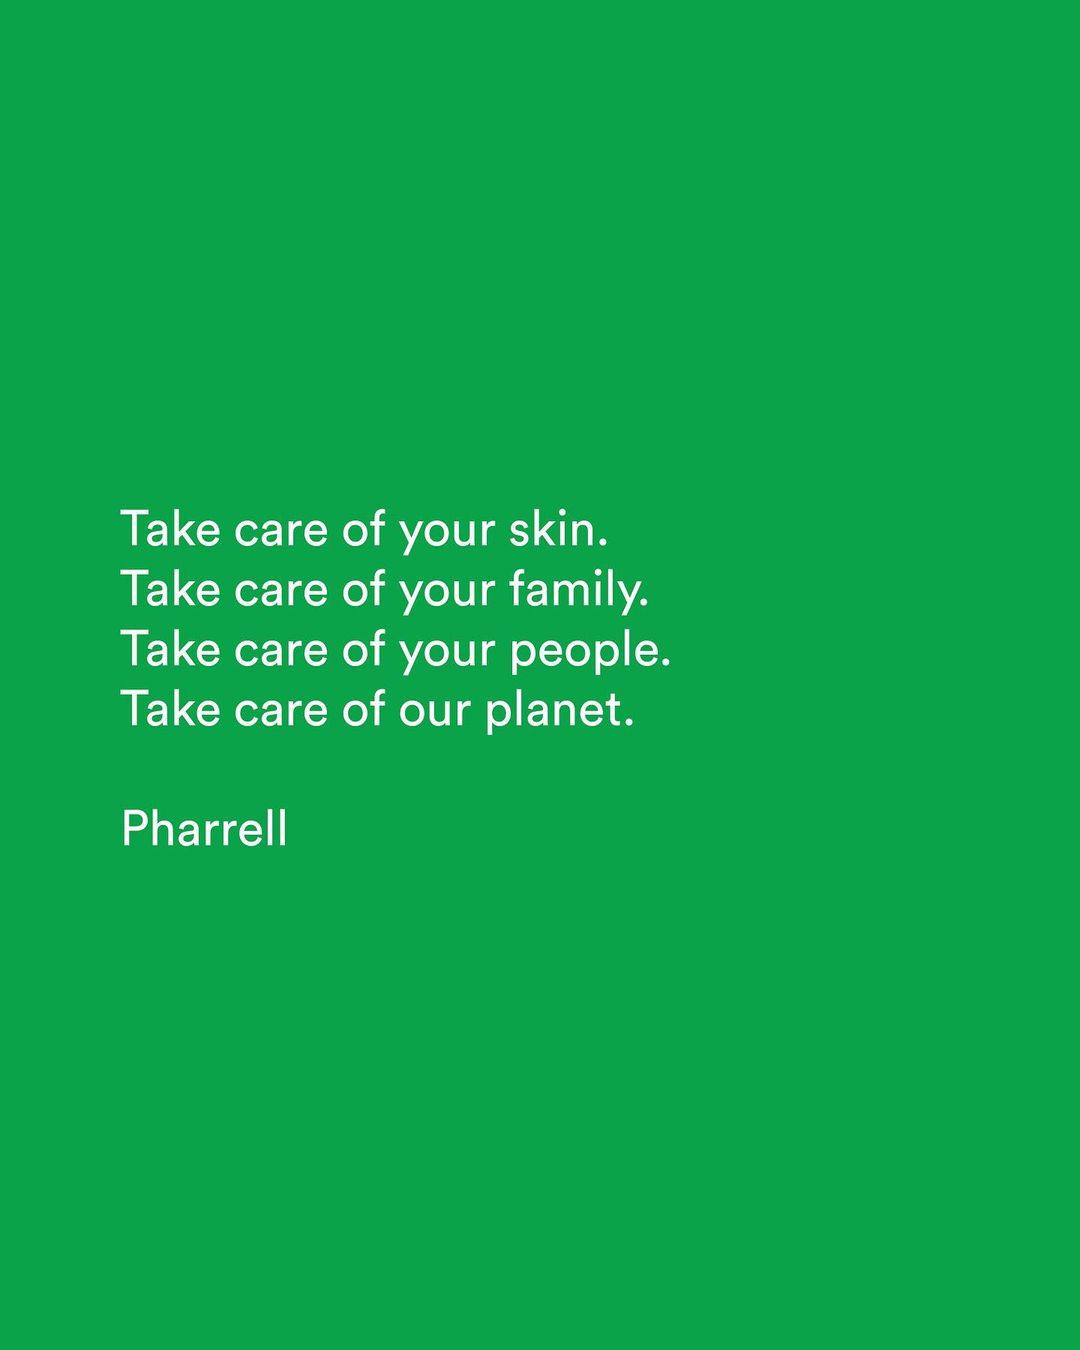 Quote on green background